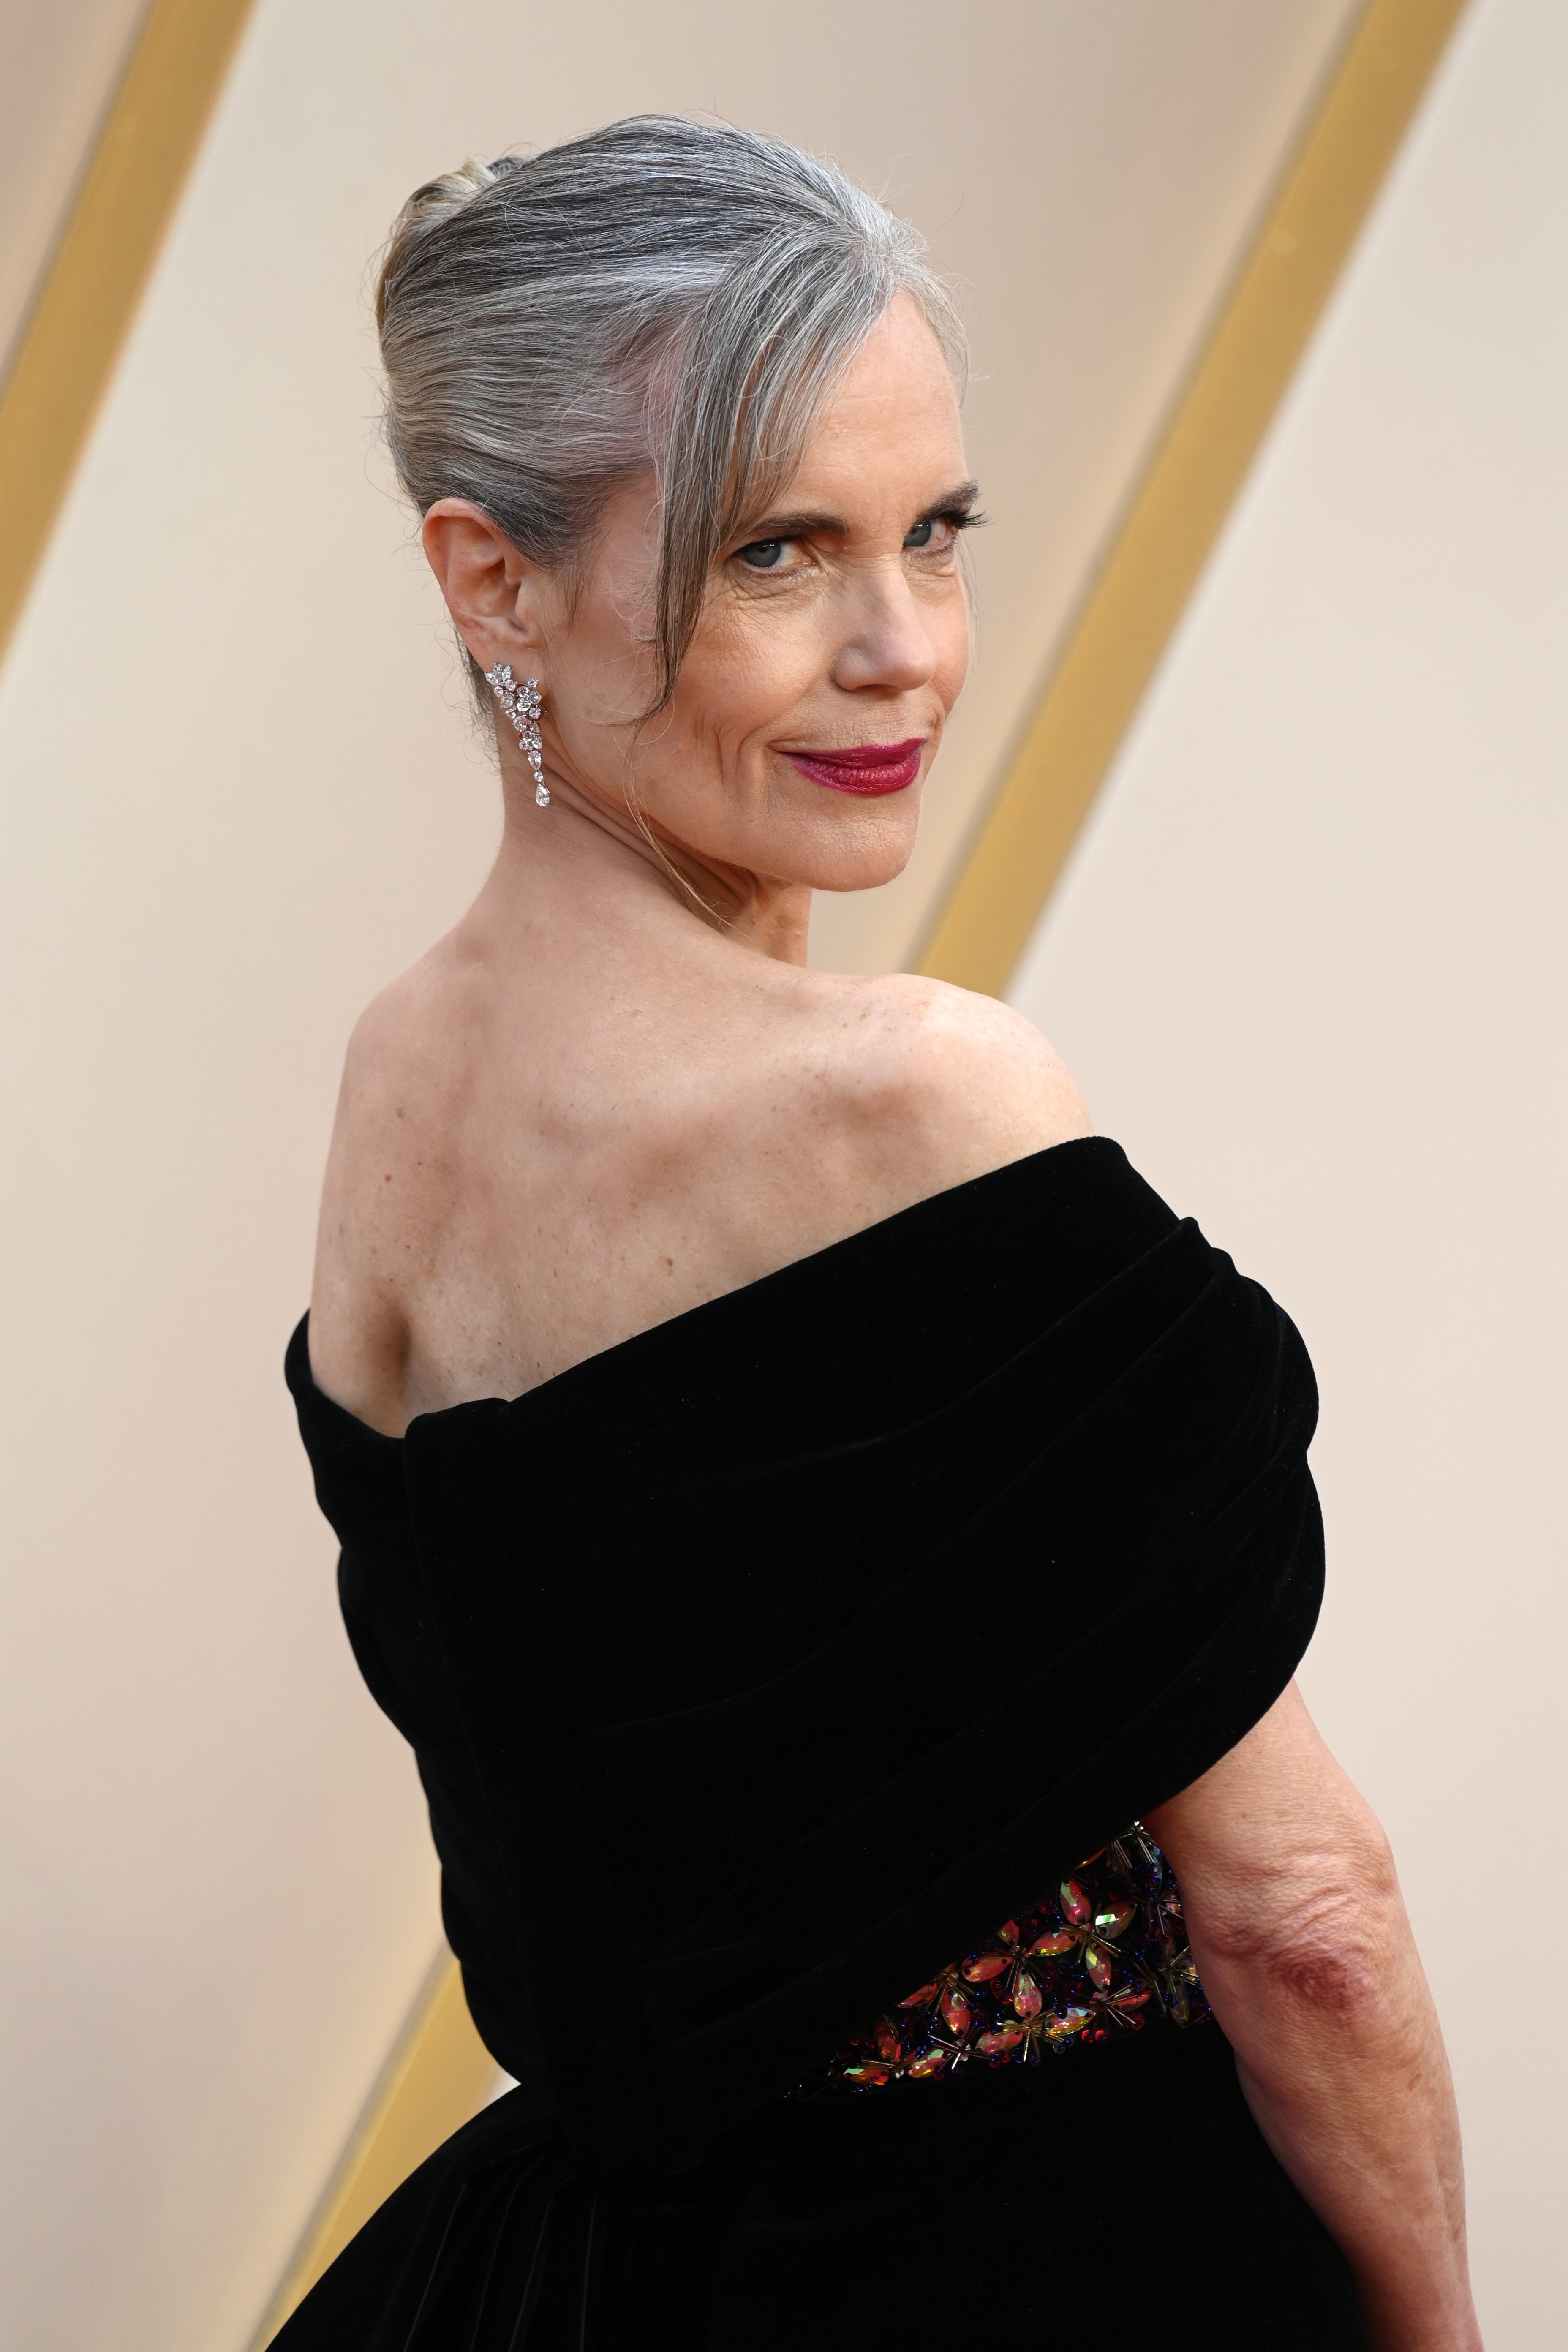 15 Celebrities With Gray Hair - Women Who Transitioned To Gray